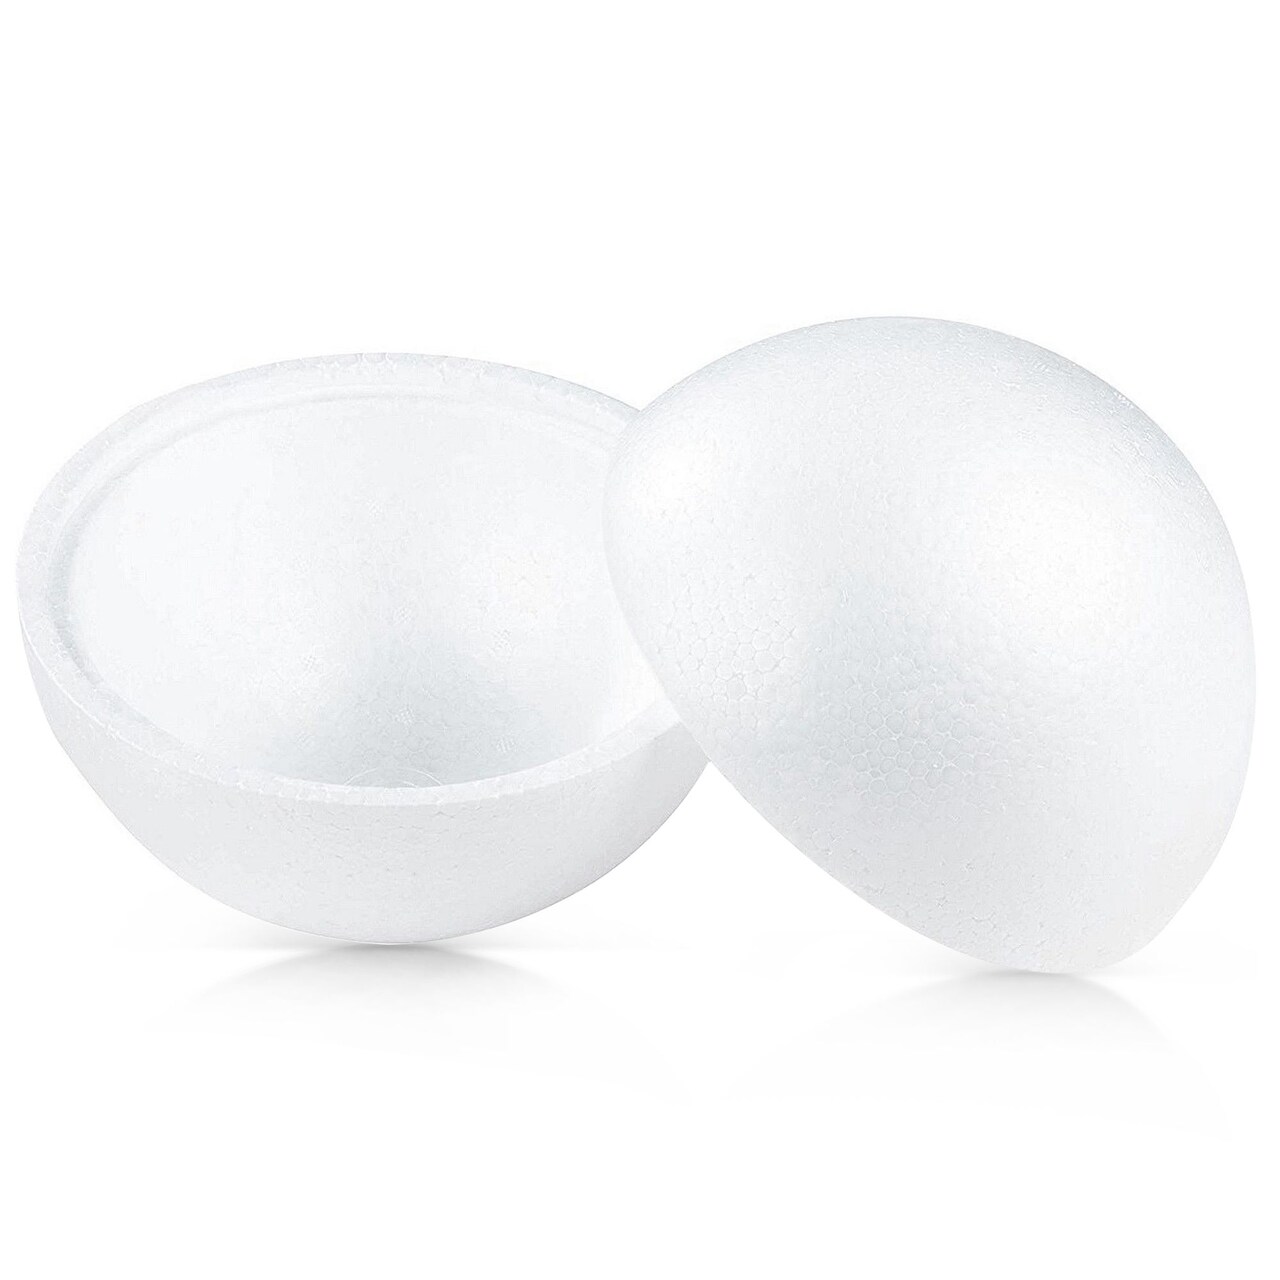 2 Pack Half Sphere Foam Balls for Crafts - 8 Large Hollow Dome